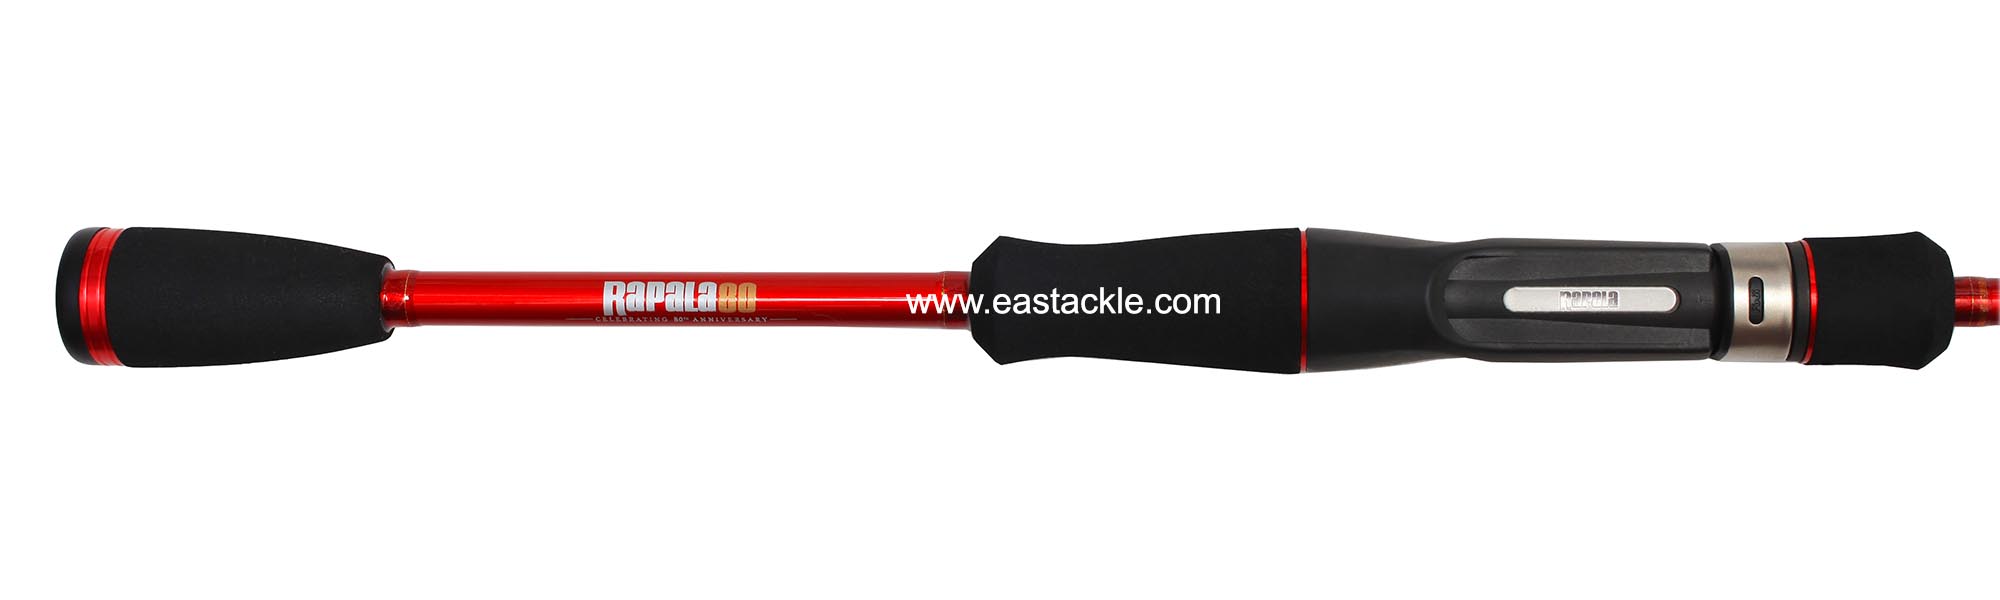 Rapala - Vaaksy - 80th Anniversary - VAC662M - Bait Casting Rod - Handle Section (Top View) | Eastackle